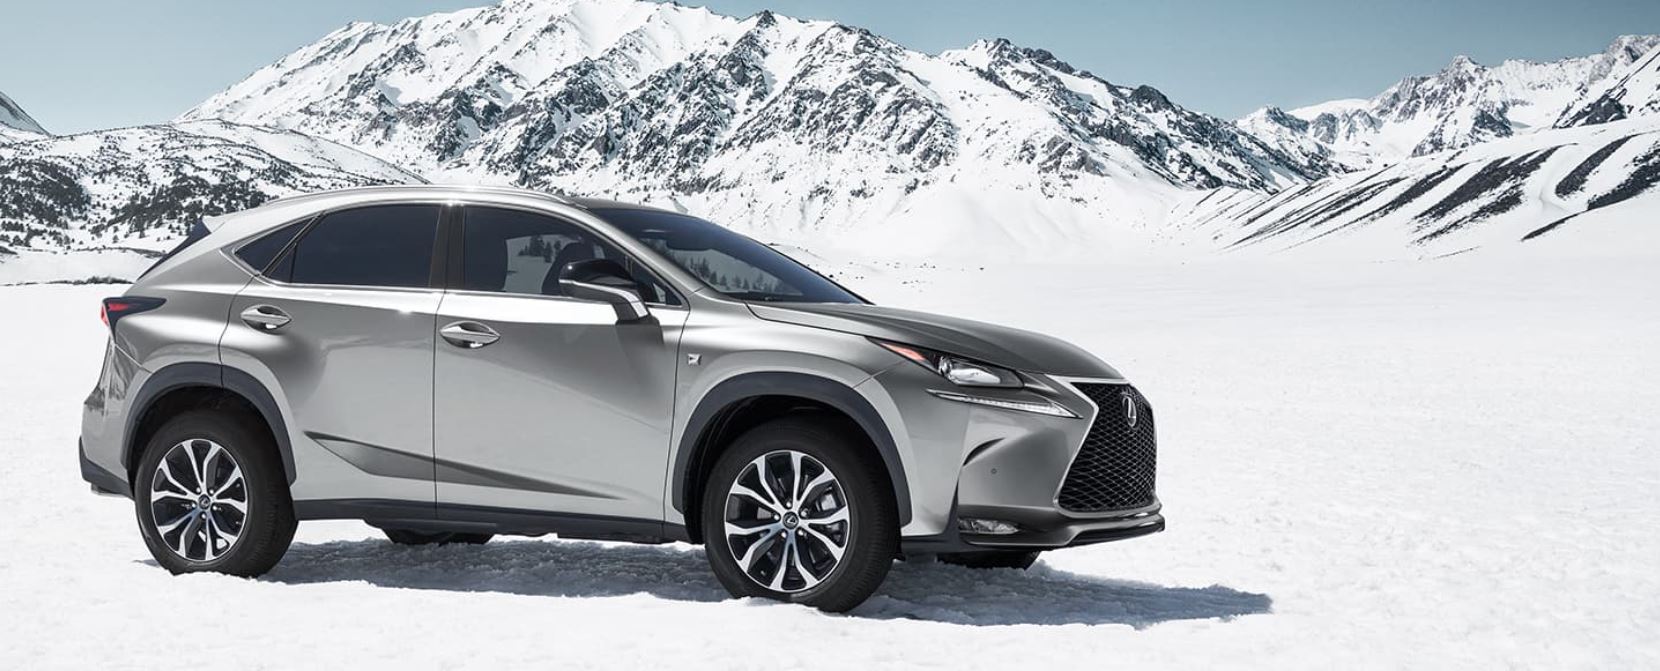 21 Lexus Nx 300 For Sale In Amherst Ny